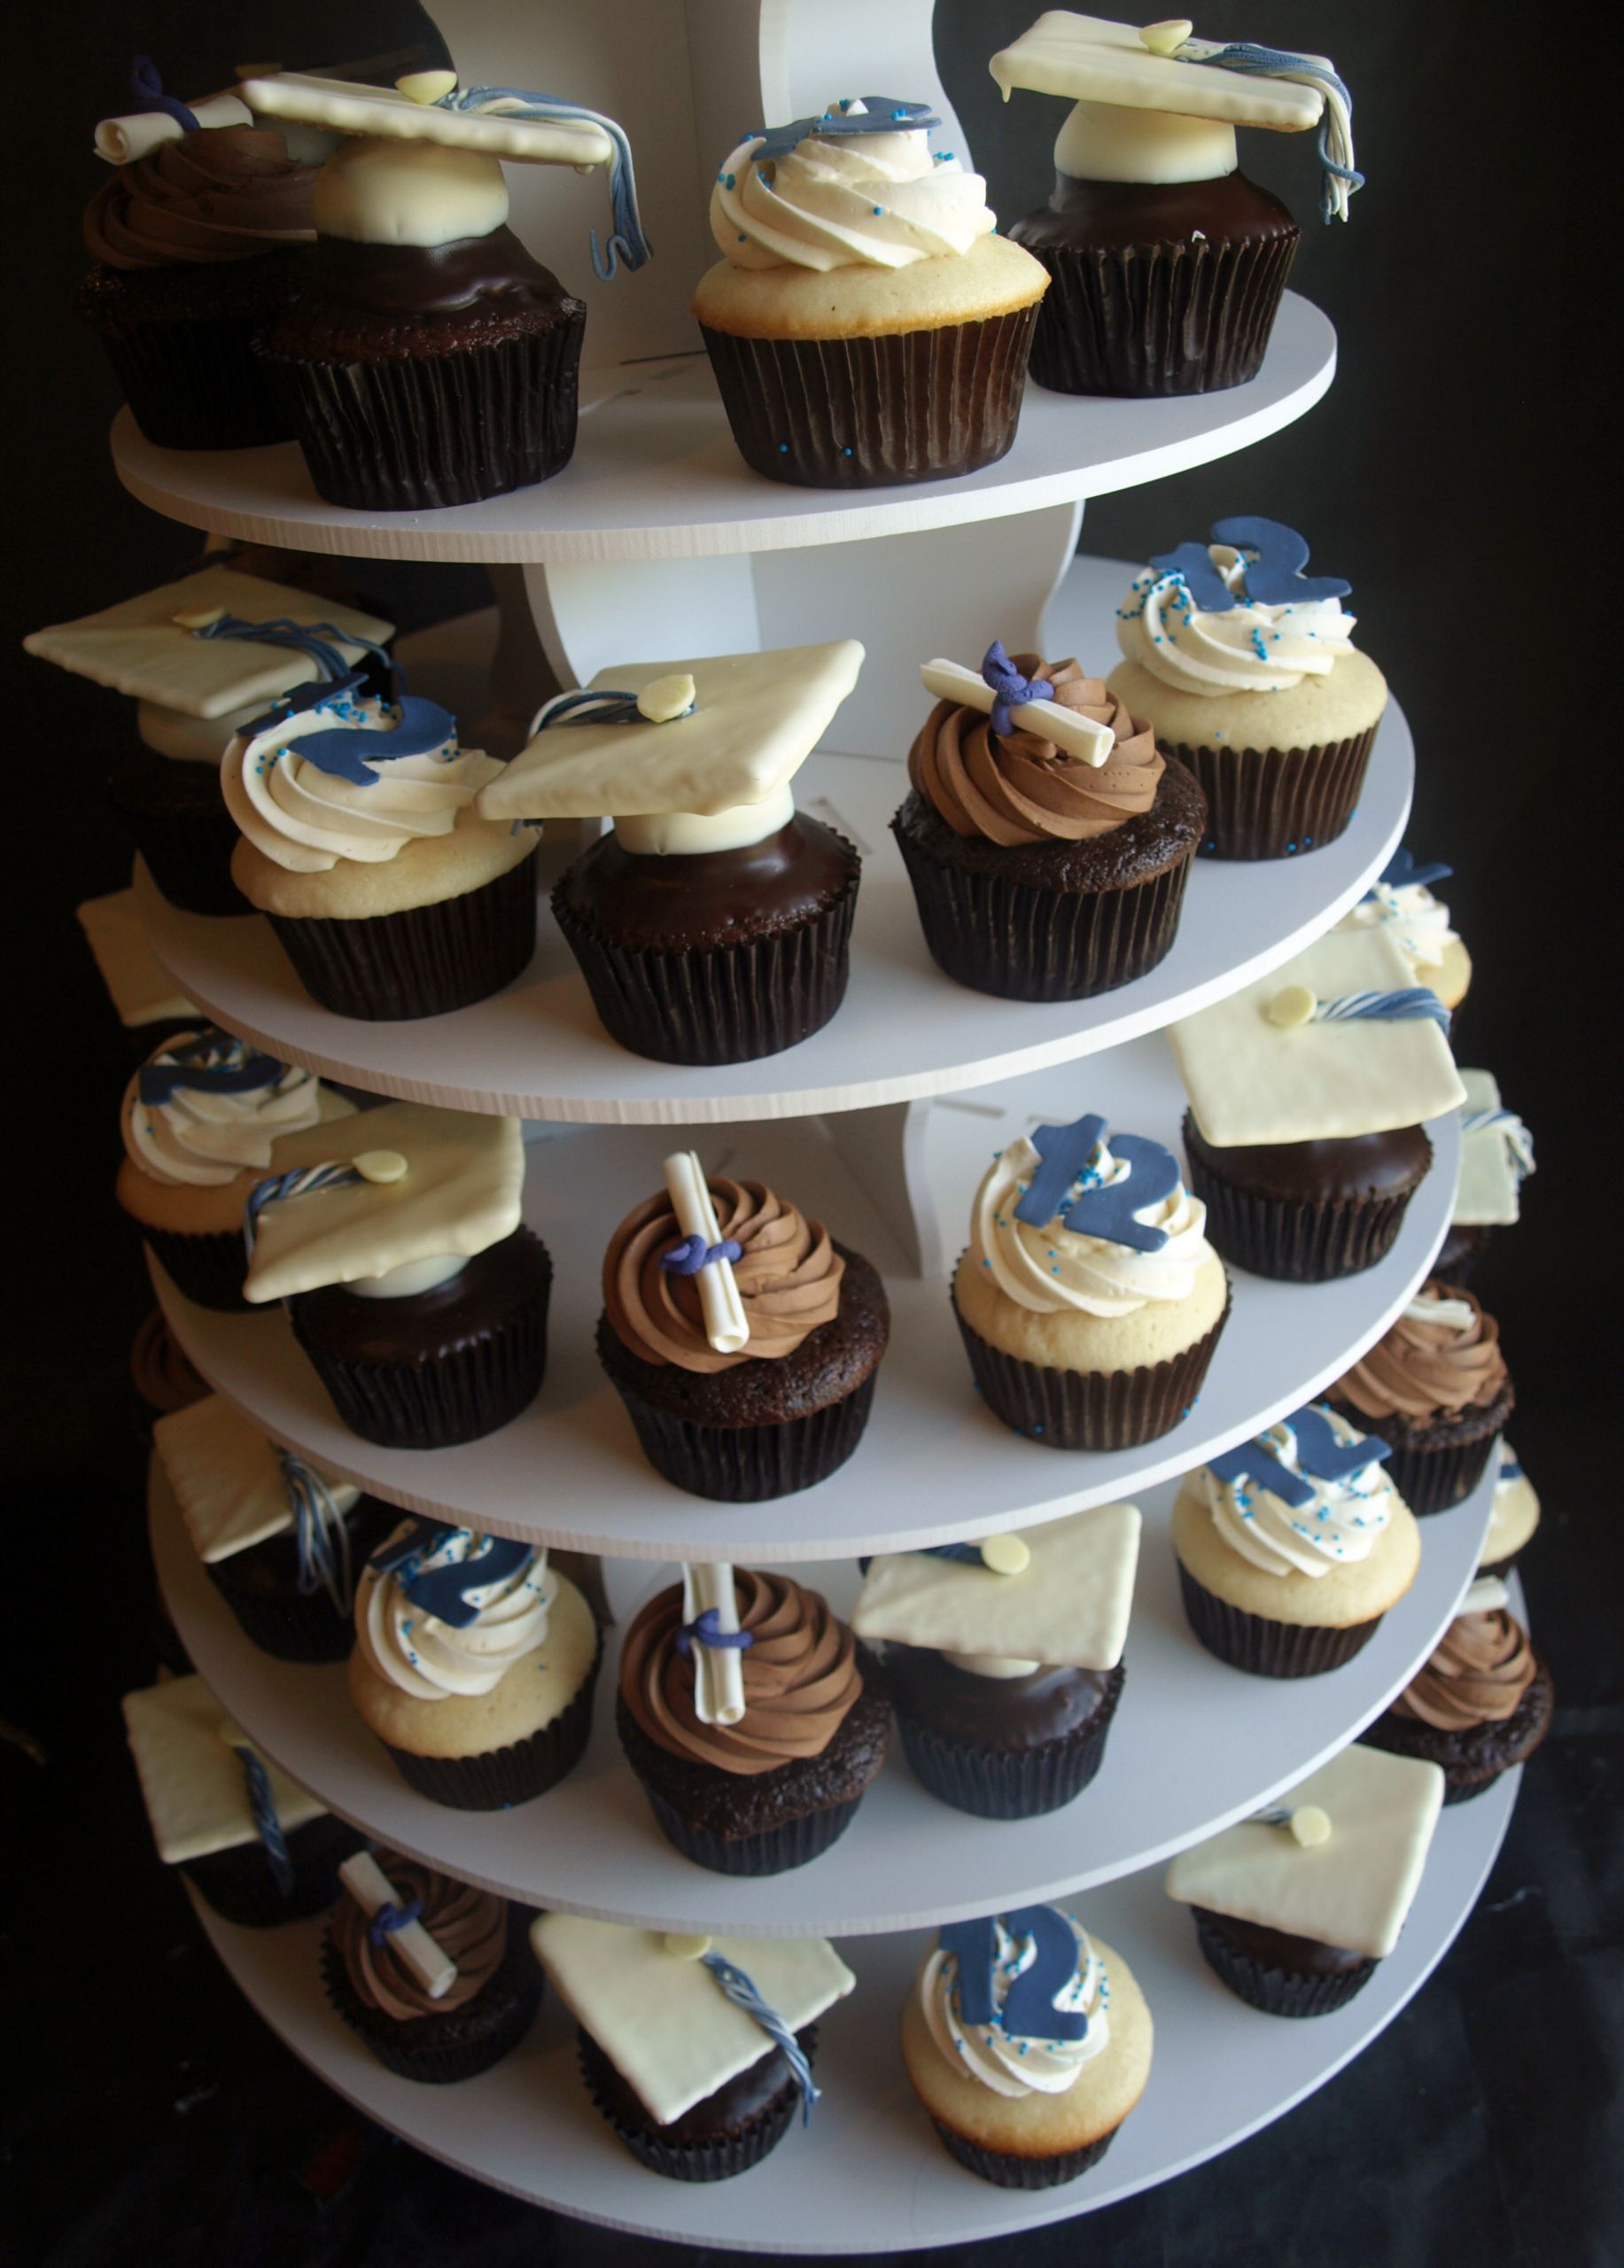 Graduation Party Cupcake Ideas
 Cupcakes by Laurie Clarke Cakes